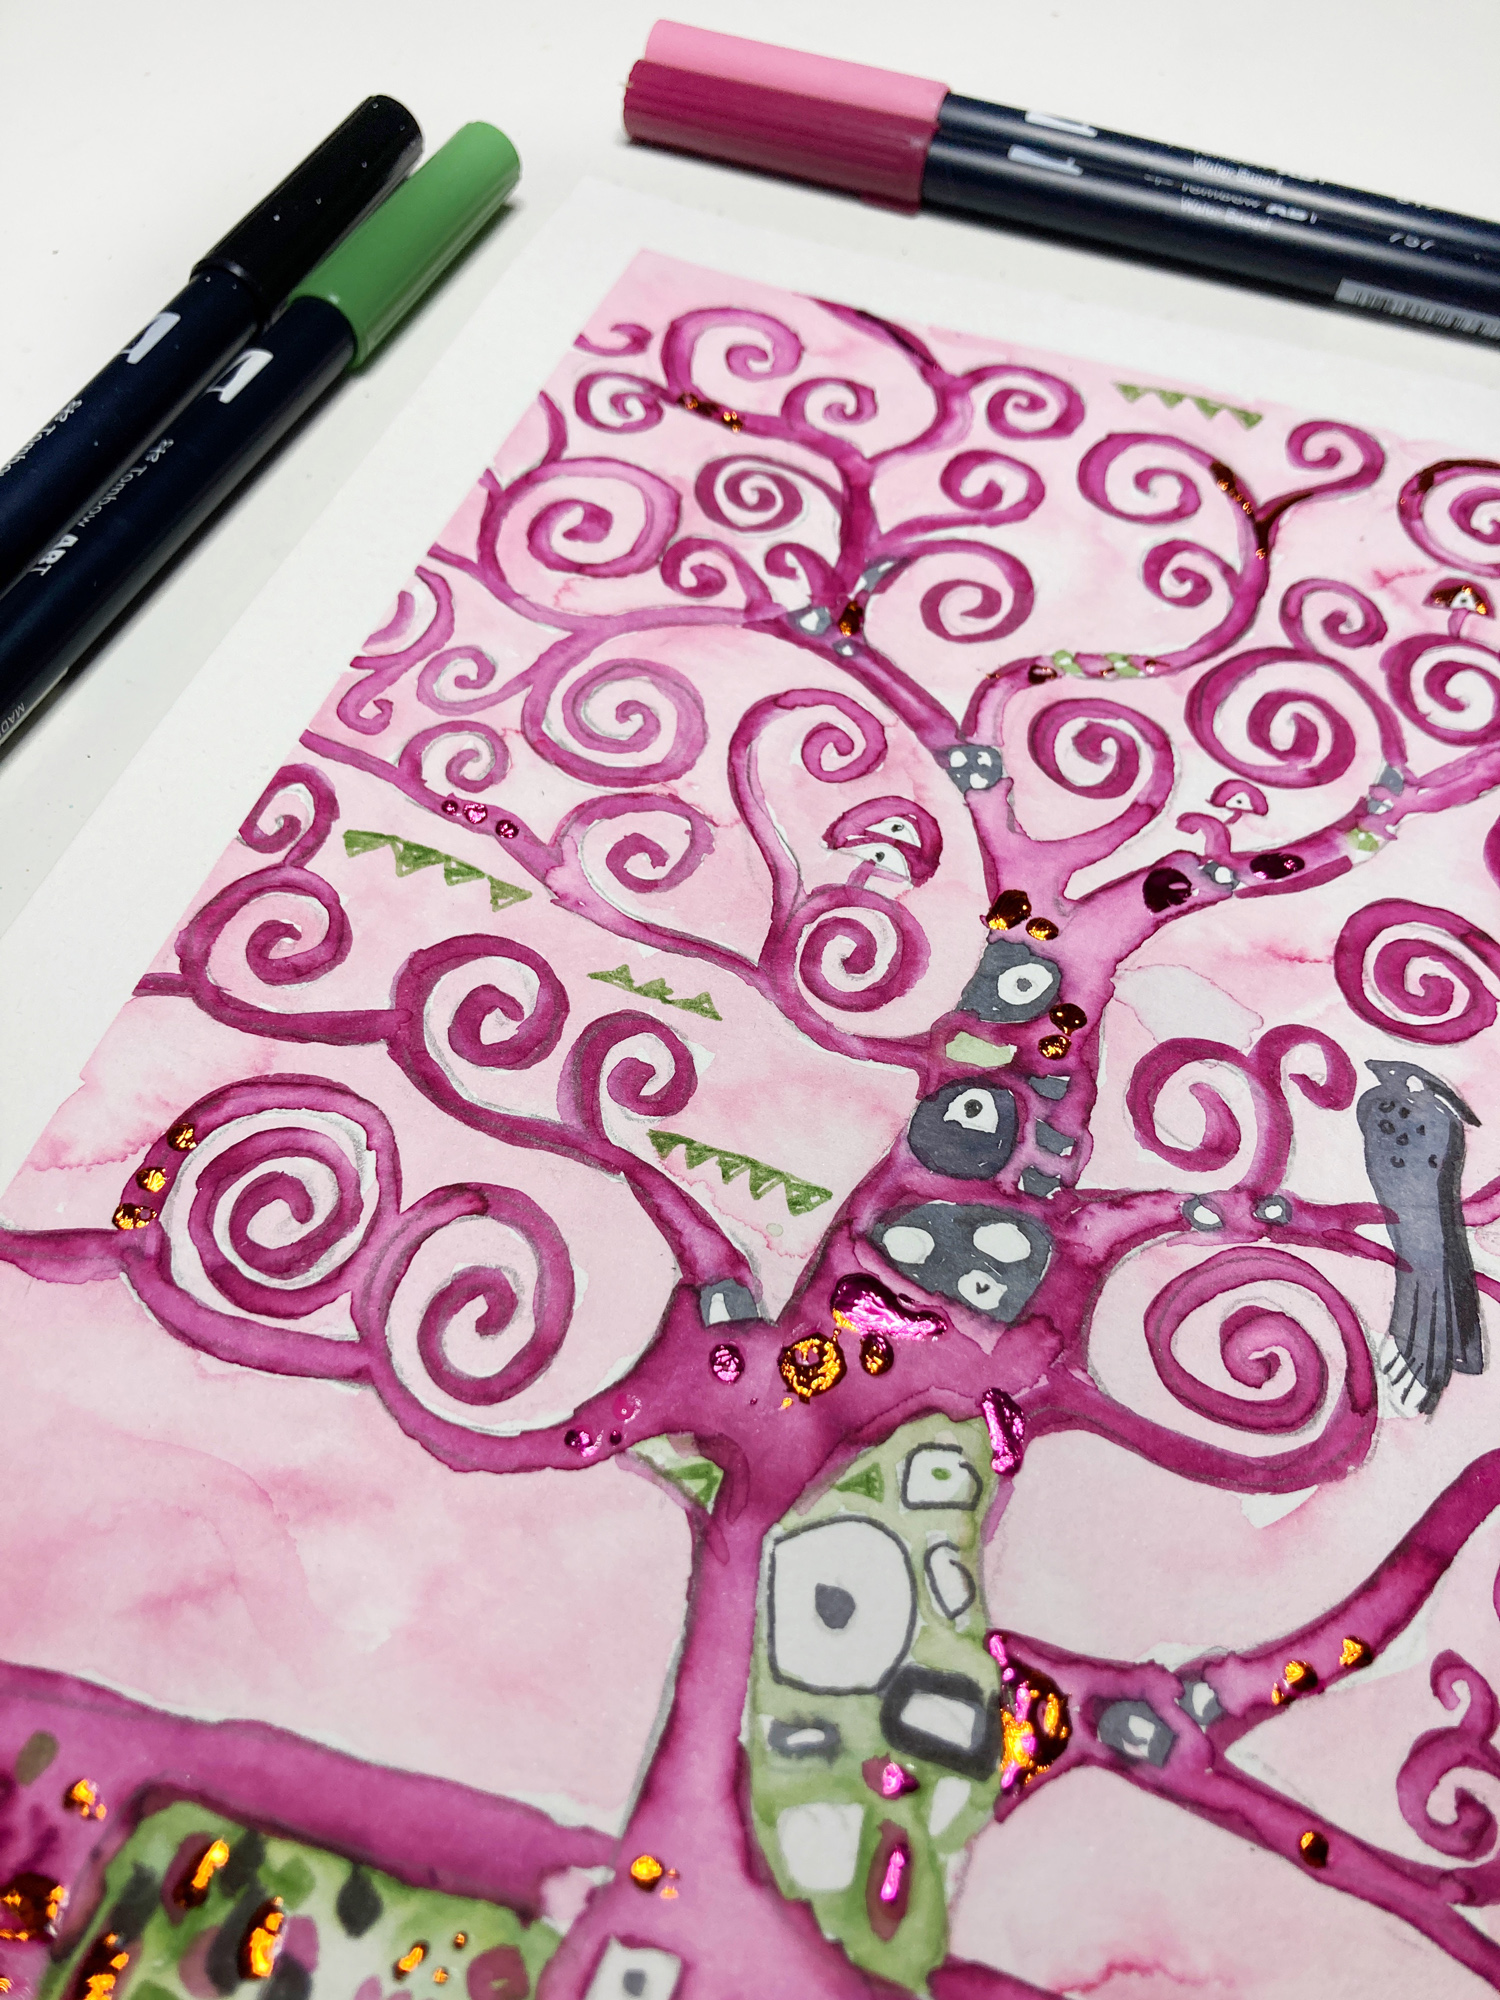 Learn how to Paint a DIY Tree of Life Watercolor Painting inspired by Gustav Klimt using this tutorial by Katie Smith on the Tombow USA Blog!